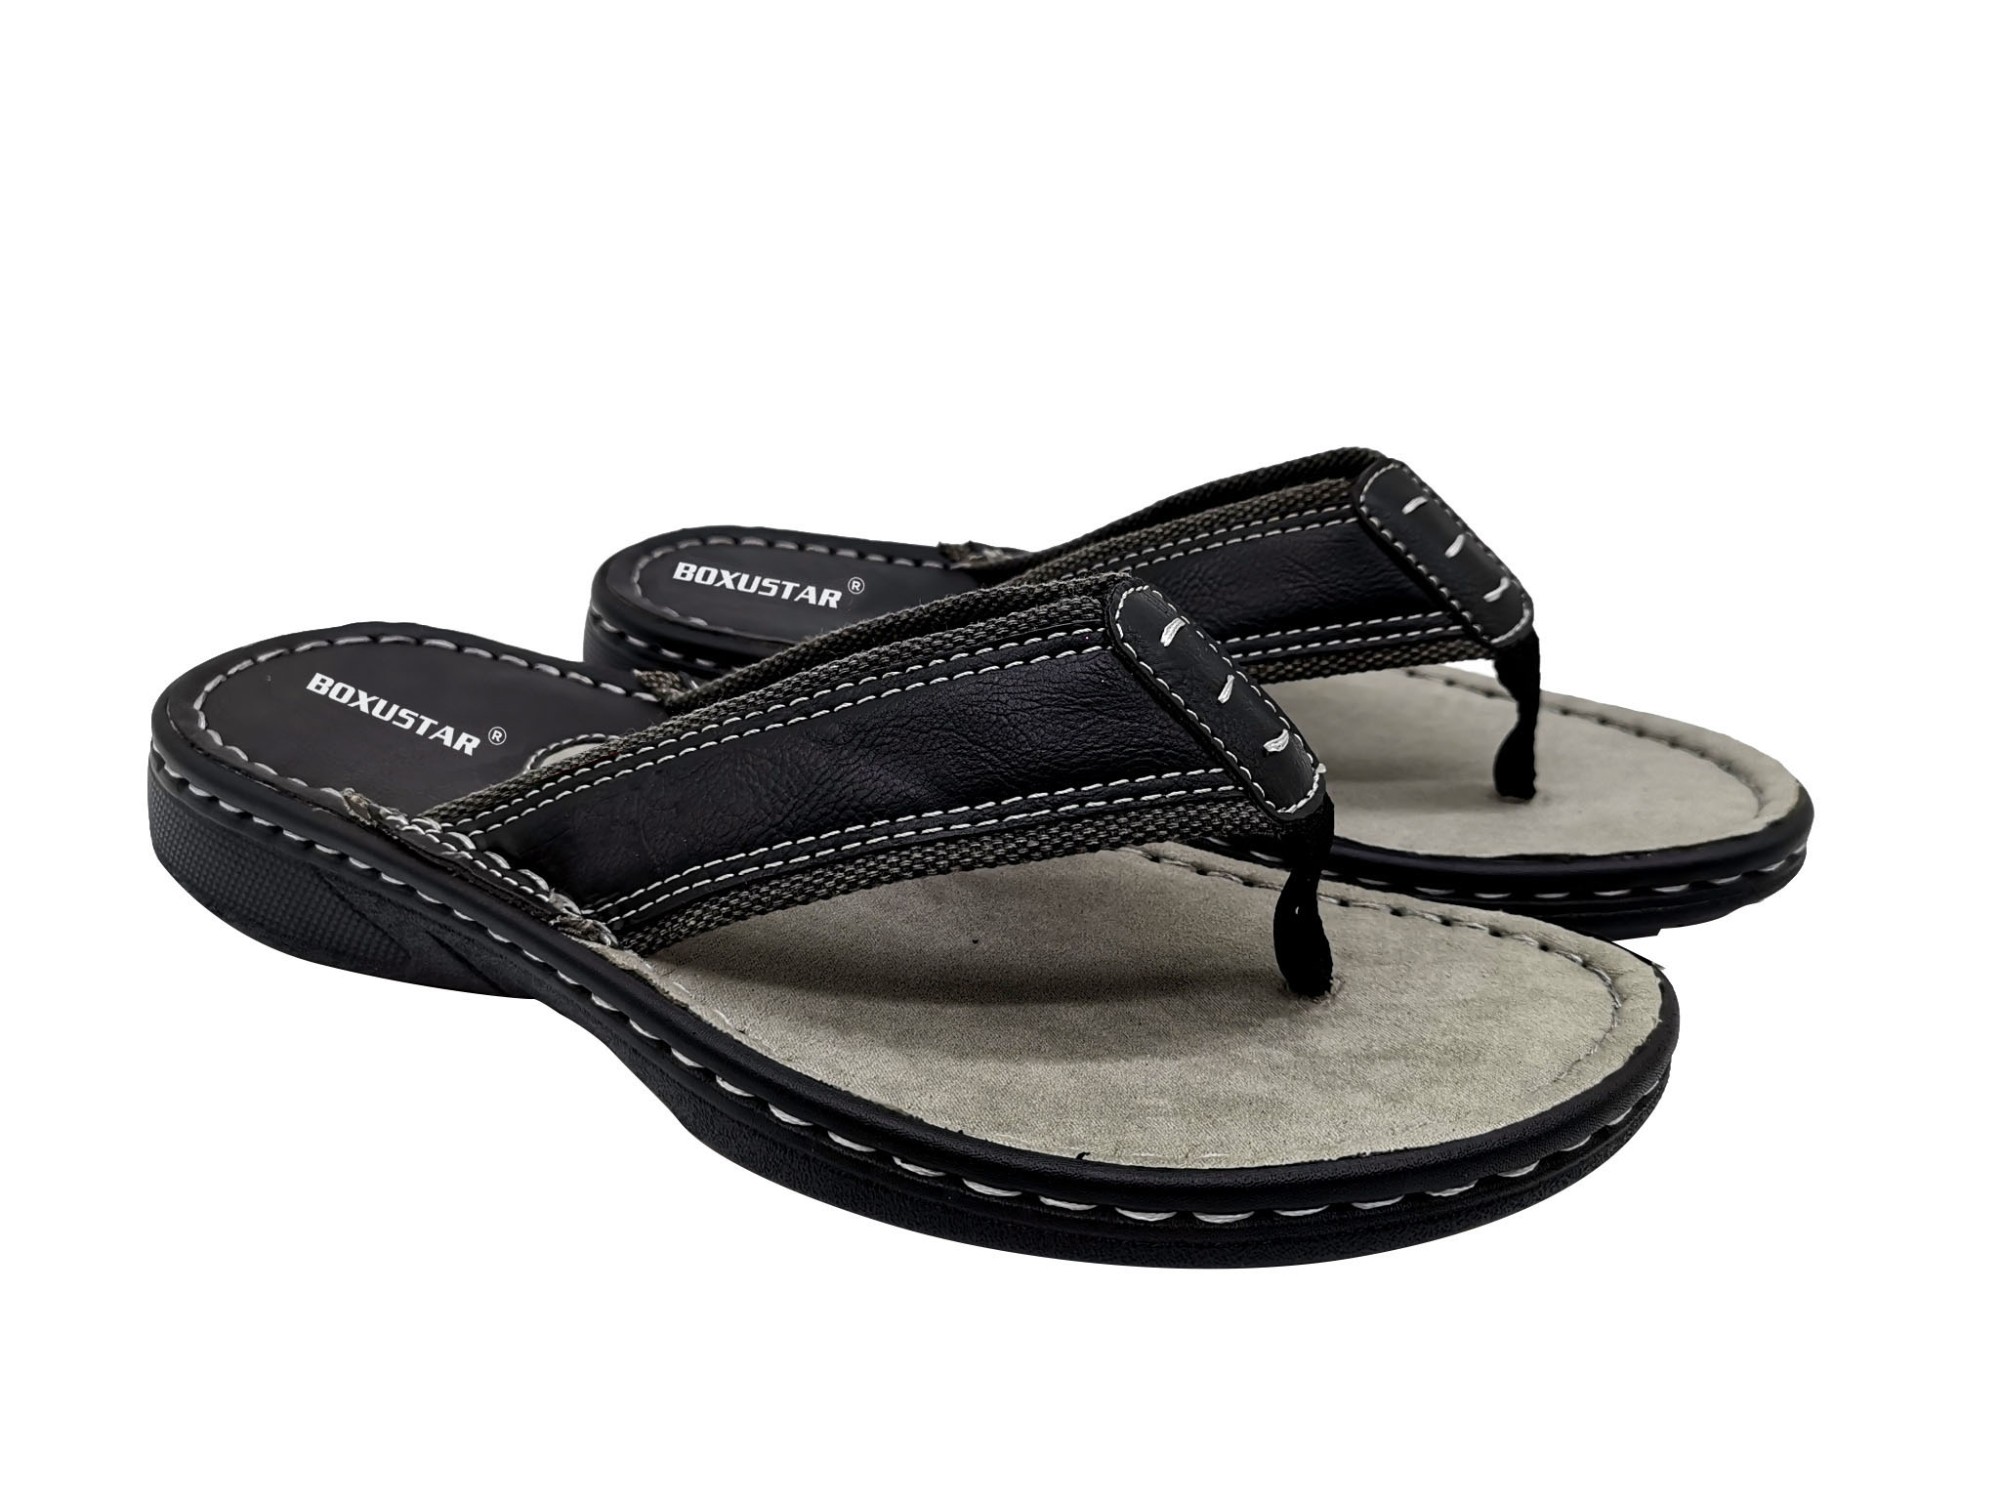 Casual flip flop with pu/canvas upper and PU outsole Manufacturers, Casual flip flop with pu/canvas upper and PU outsole Factory, Supply Casual flip flop with pu/canvas upper and PU outsole